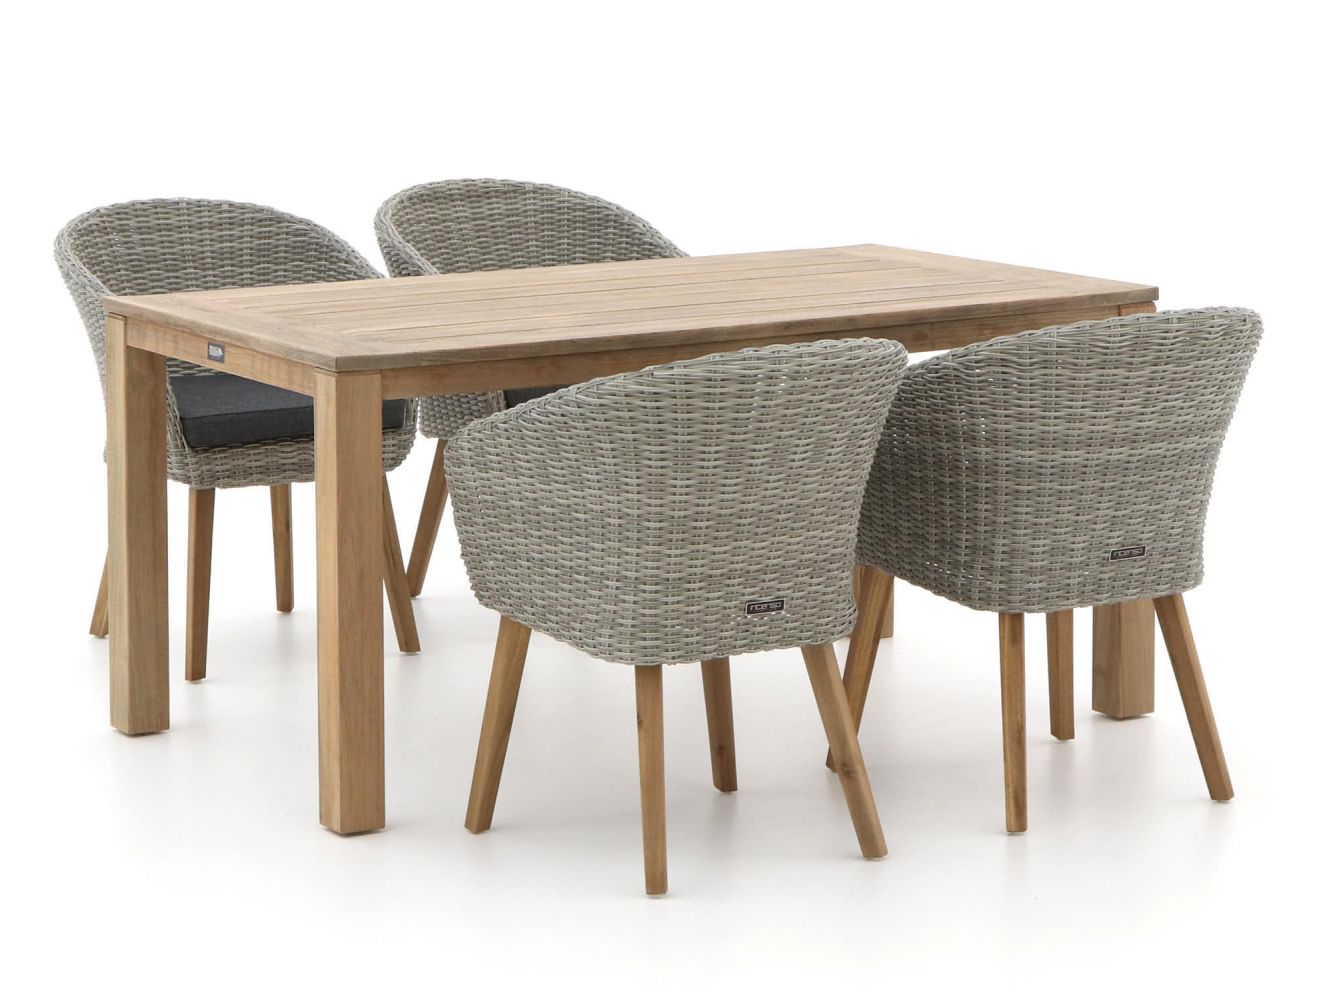 2189a549b78d3279c25b368867f6cb7a60bb0499 118281 p01 tgivtq2nyhgjlflj - Intenso Tropea/ROUGH-S 160cm dining tuinset 5-delig